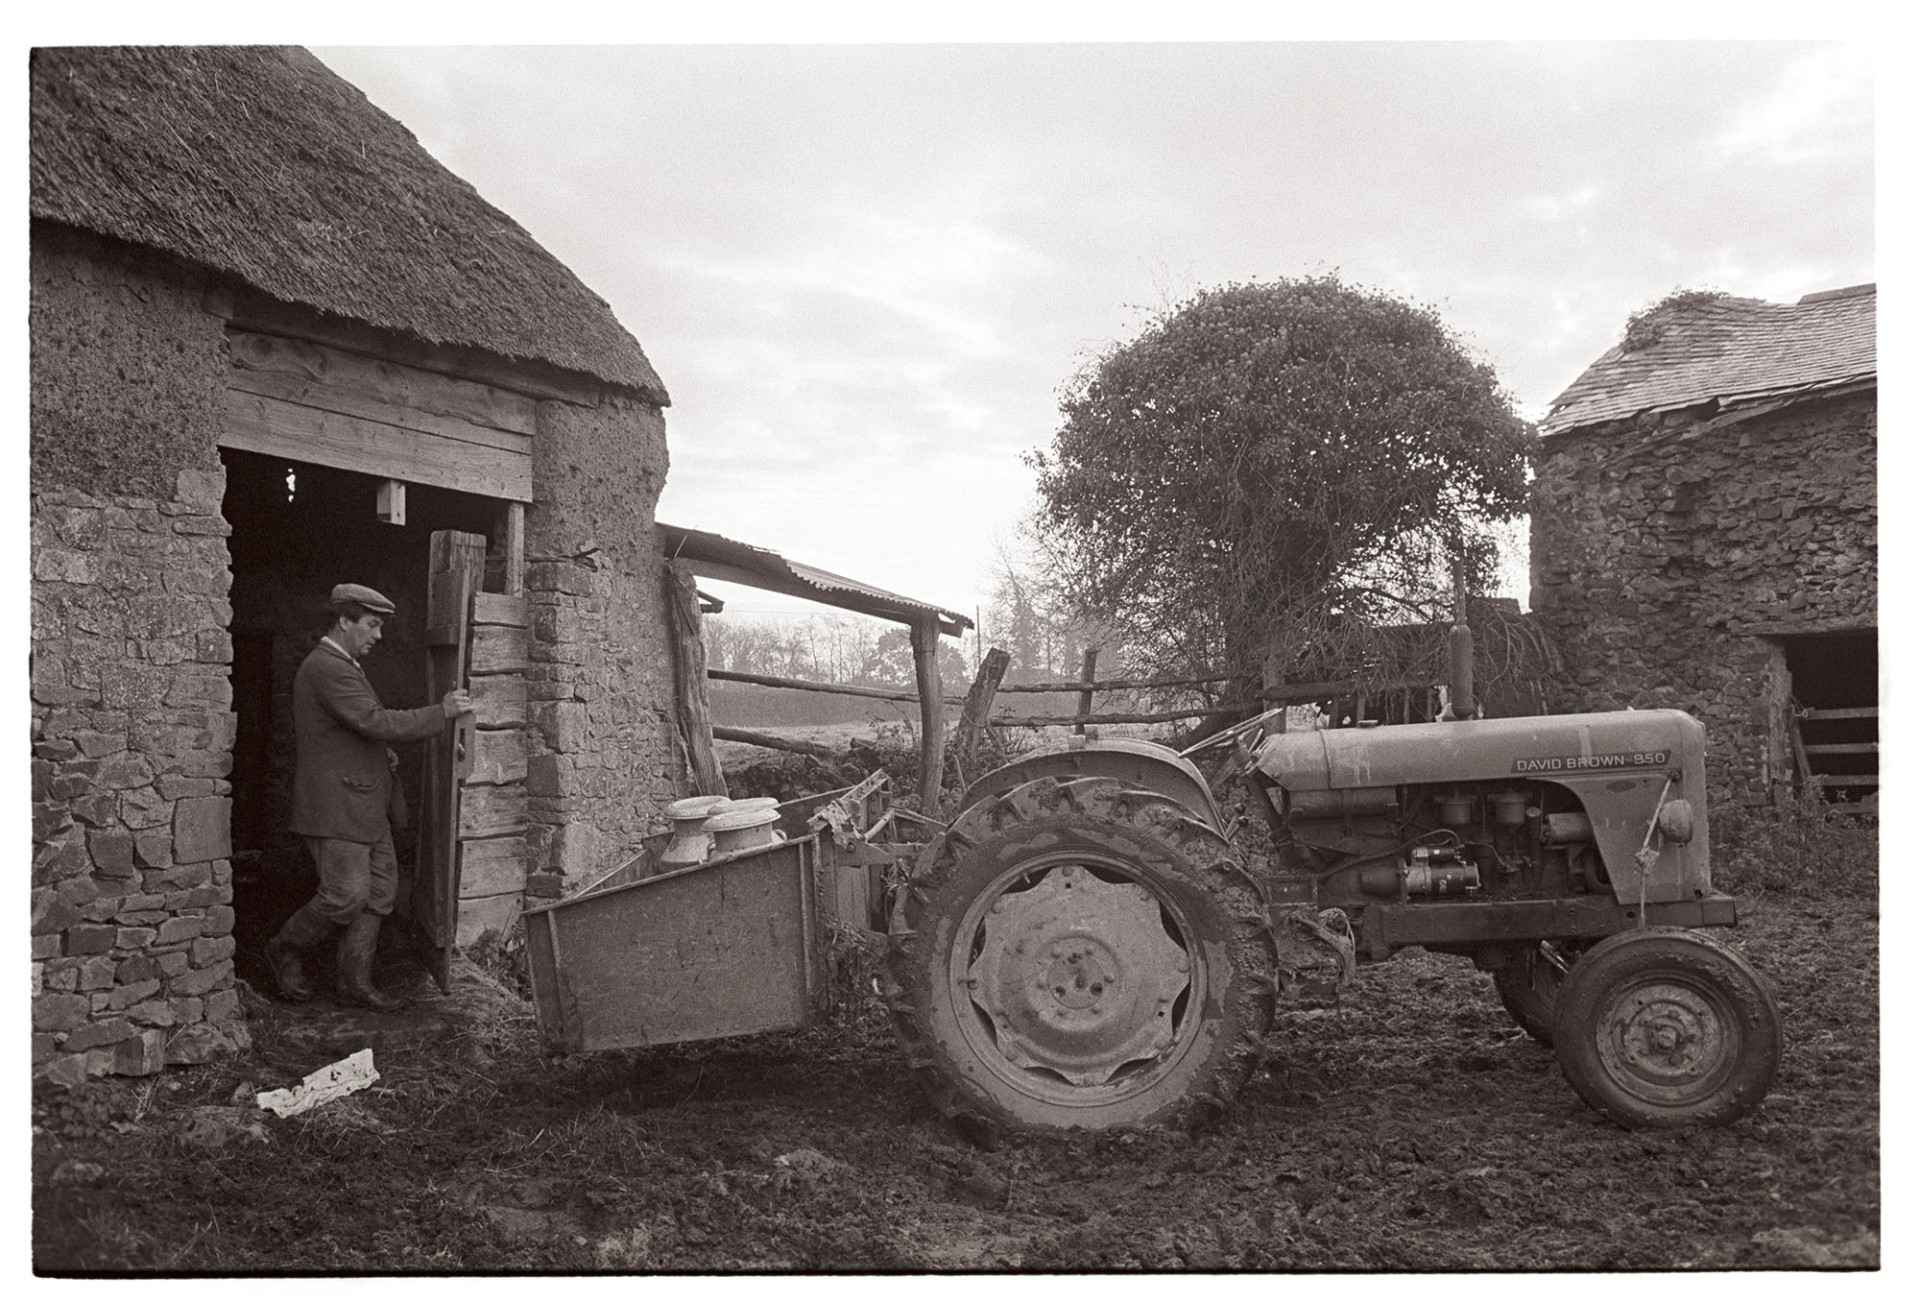 Old cob and thatch barns, farmer bringing water in churn with tractor and link box.
[Morley King in the doorway of a cob and stone barn with a thatched roof at Middle Week, Iddesleigh. In the muddy farmyard outside the barn is a David Brown tractor with churns of water in the link box.]